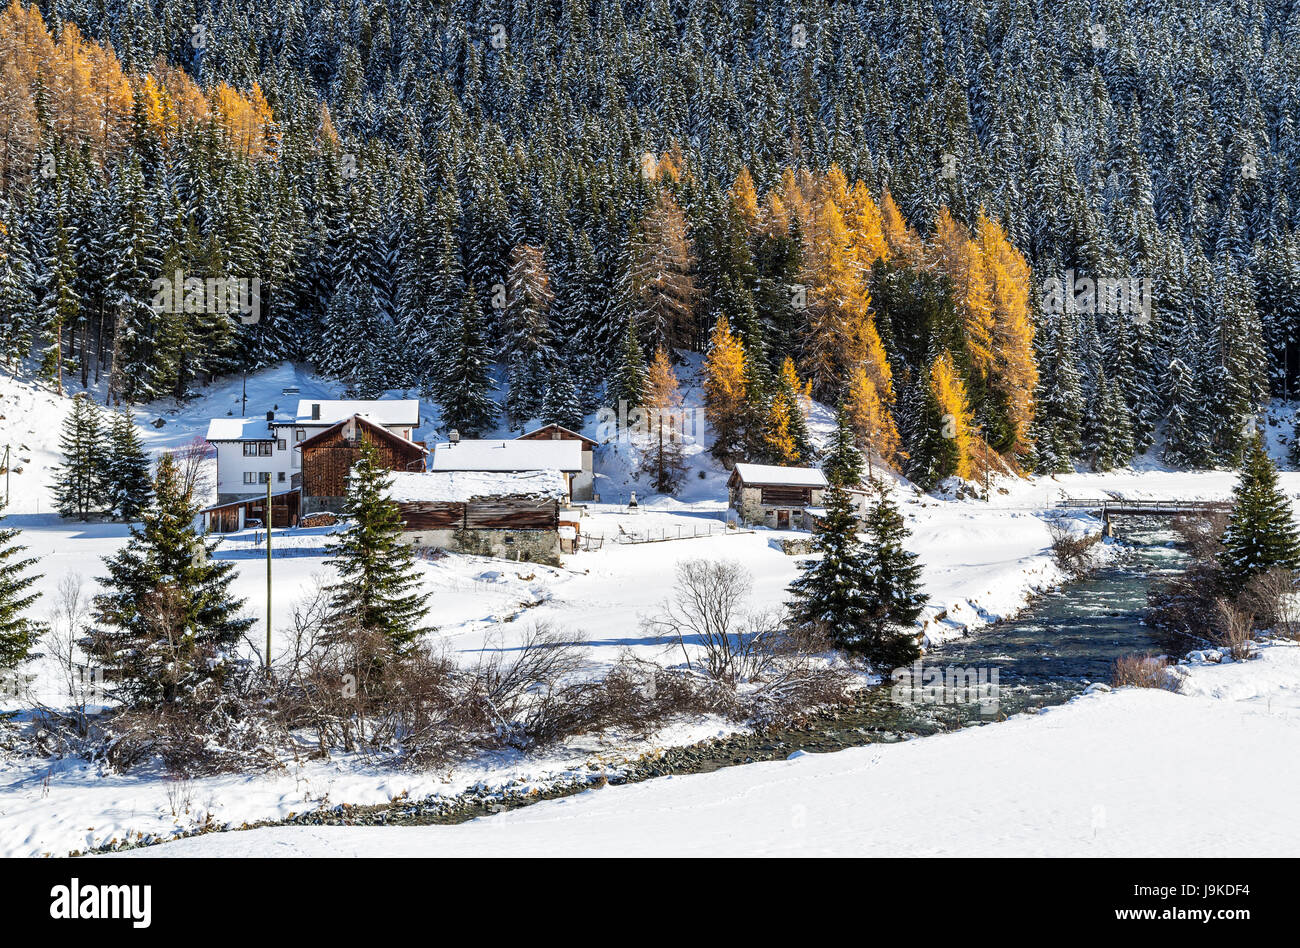 Snowy landscape and colorful trees in the small village of Mulegns Val Sursette Canton of Graubünden Switzerland Europe Stock Photo